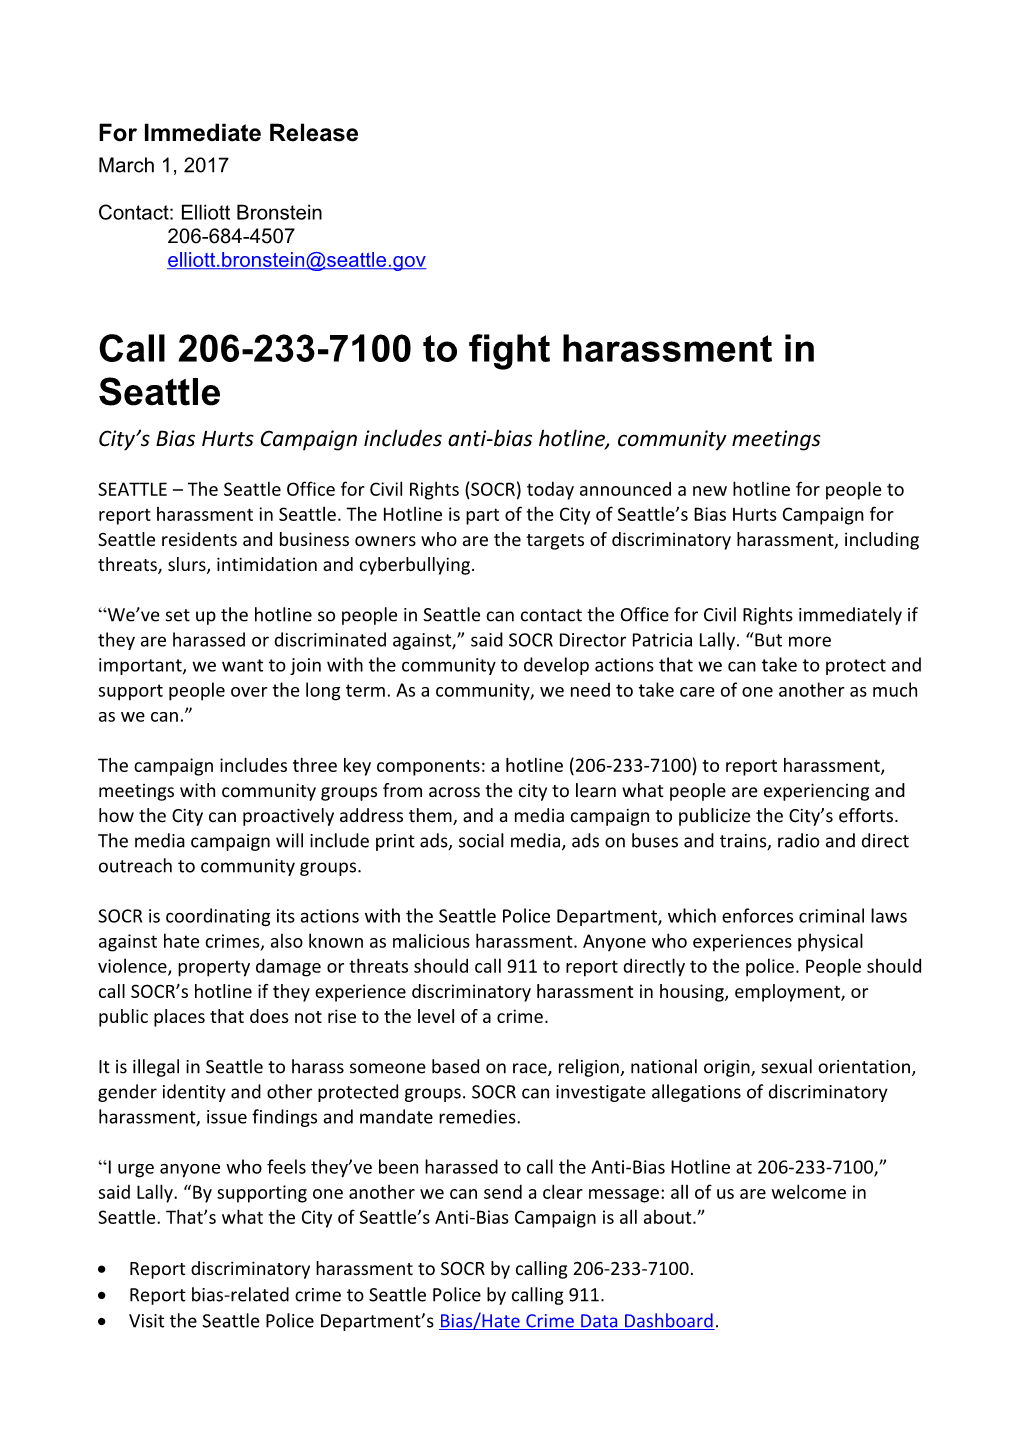 Call 206-233-7100 to Fight Harassment in Seattle